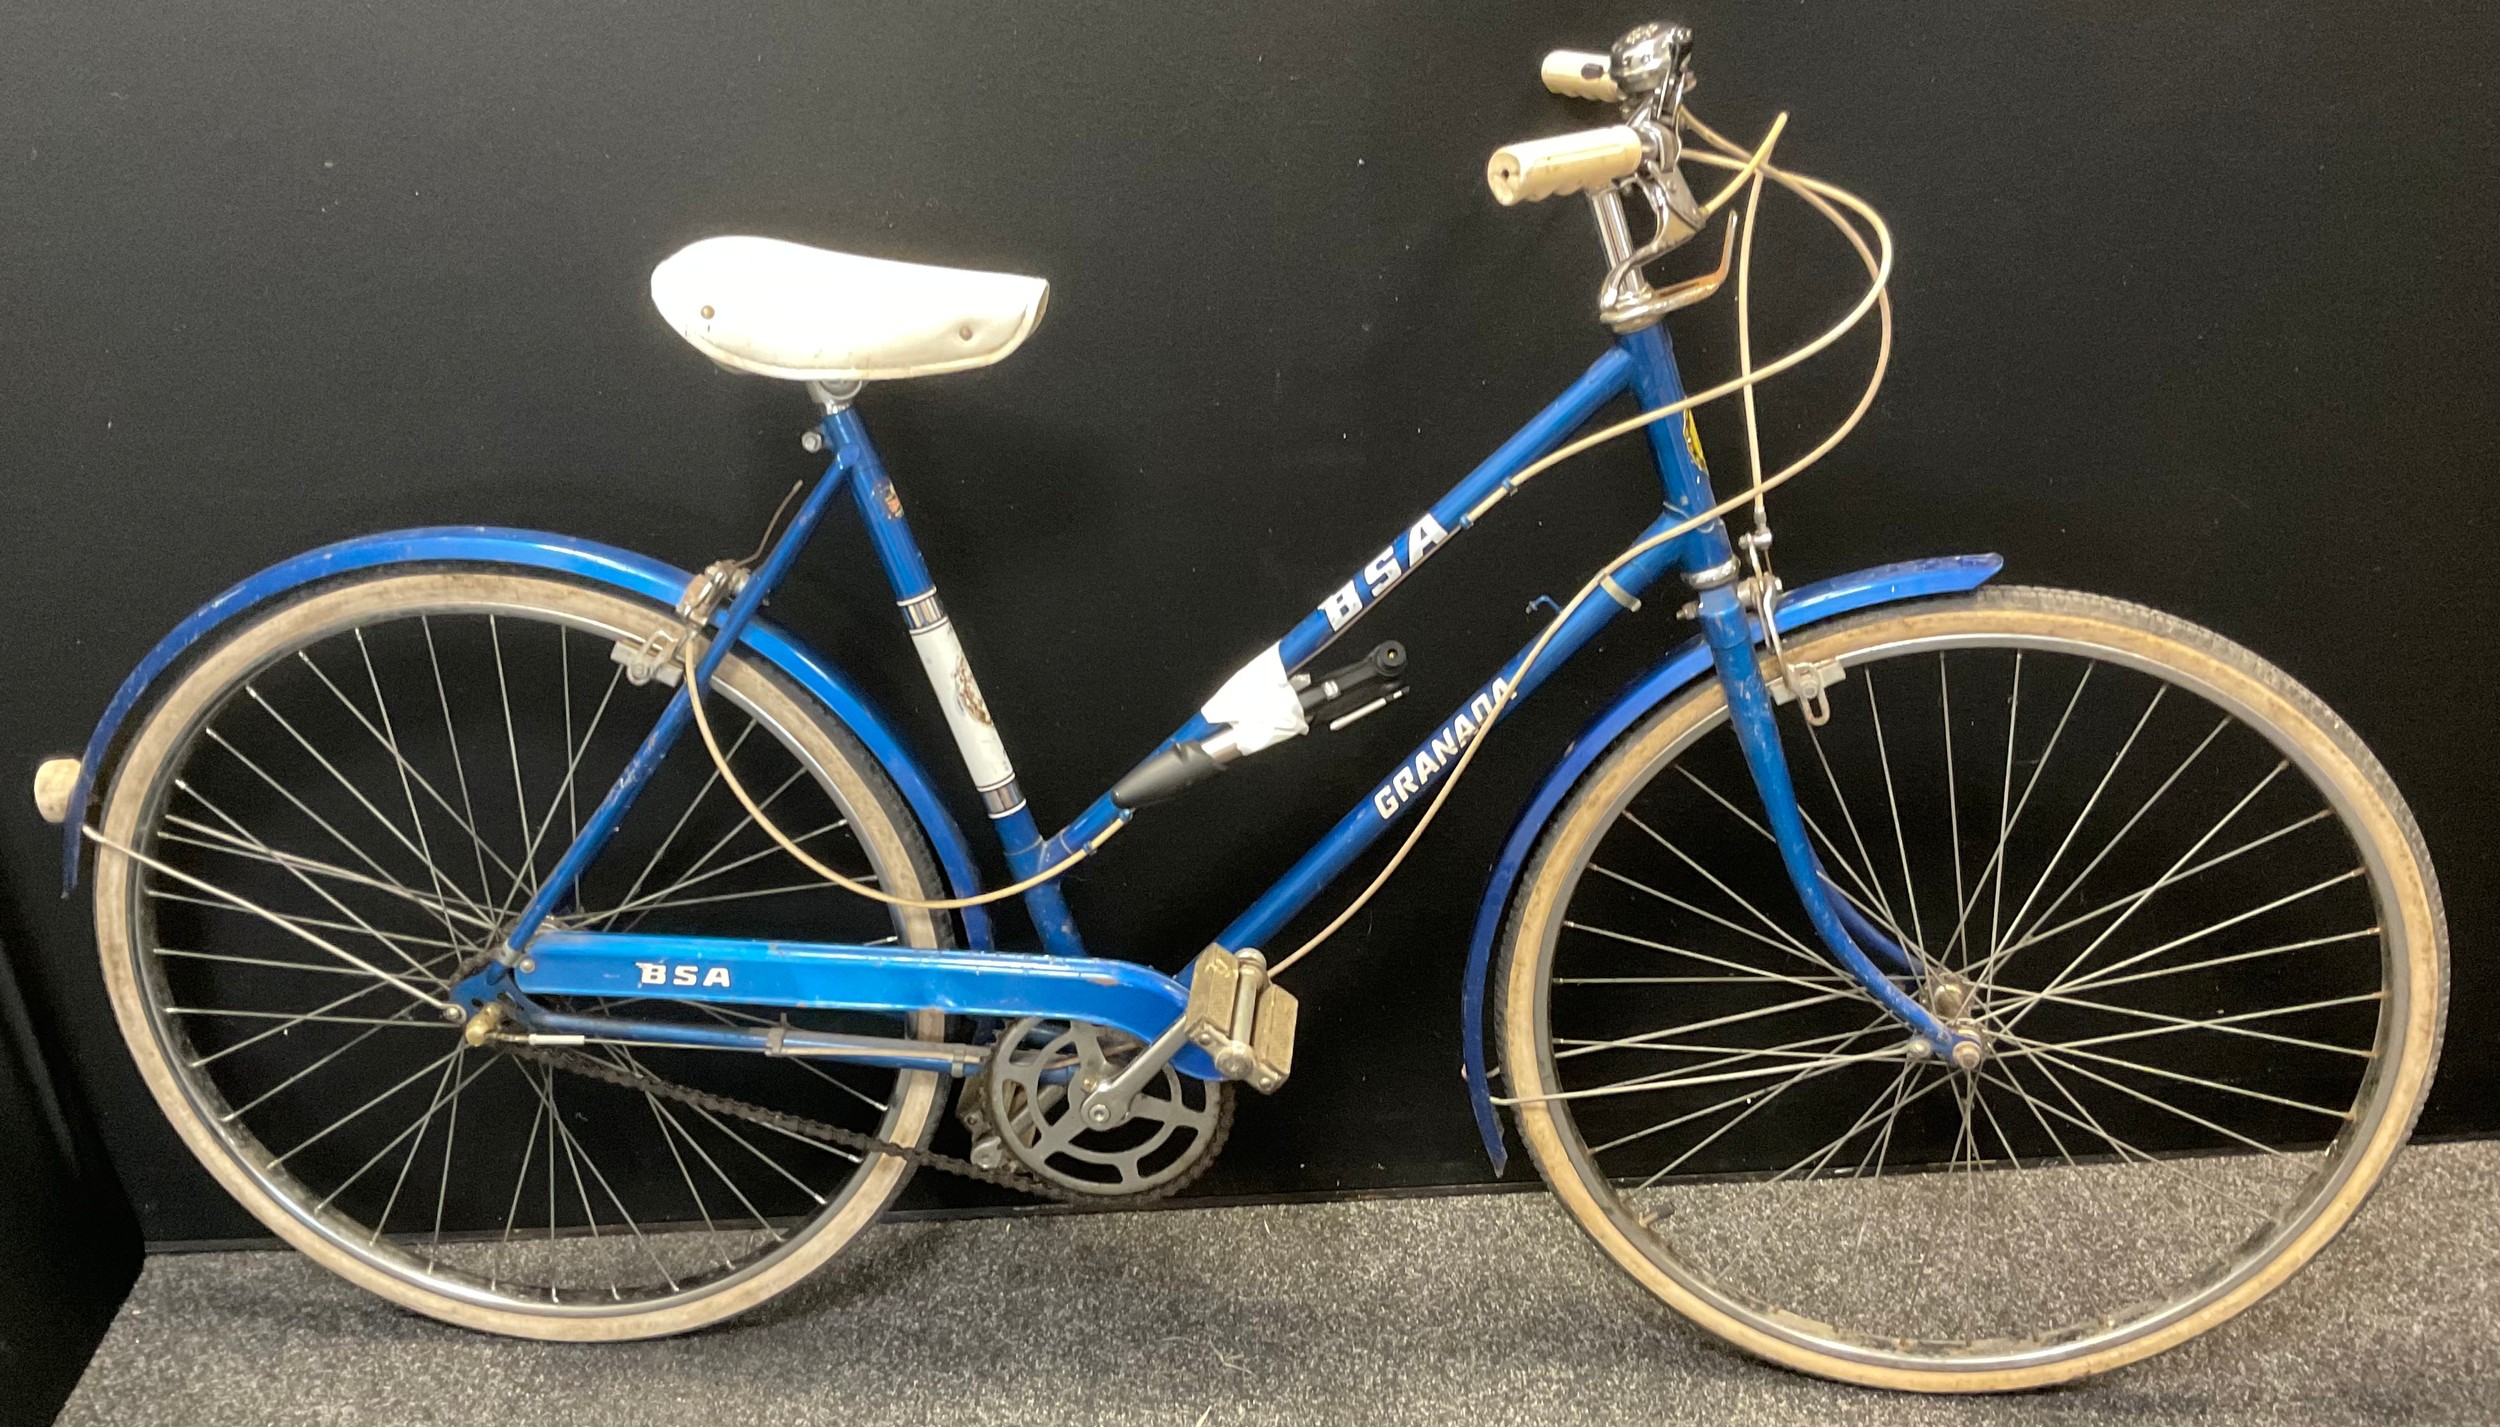 A BSA Granada lady’s bicycle, blue frame, three speed gears, 23 inch wheels, white wall tyres